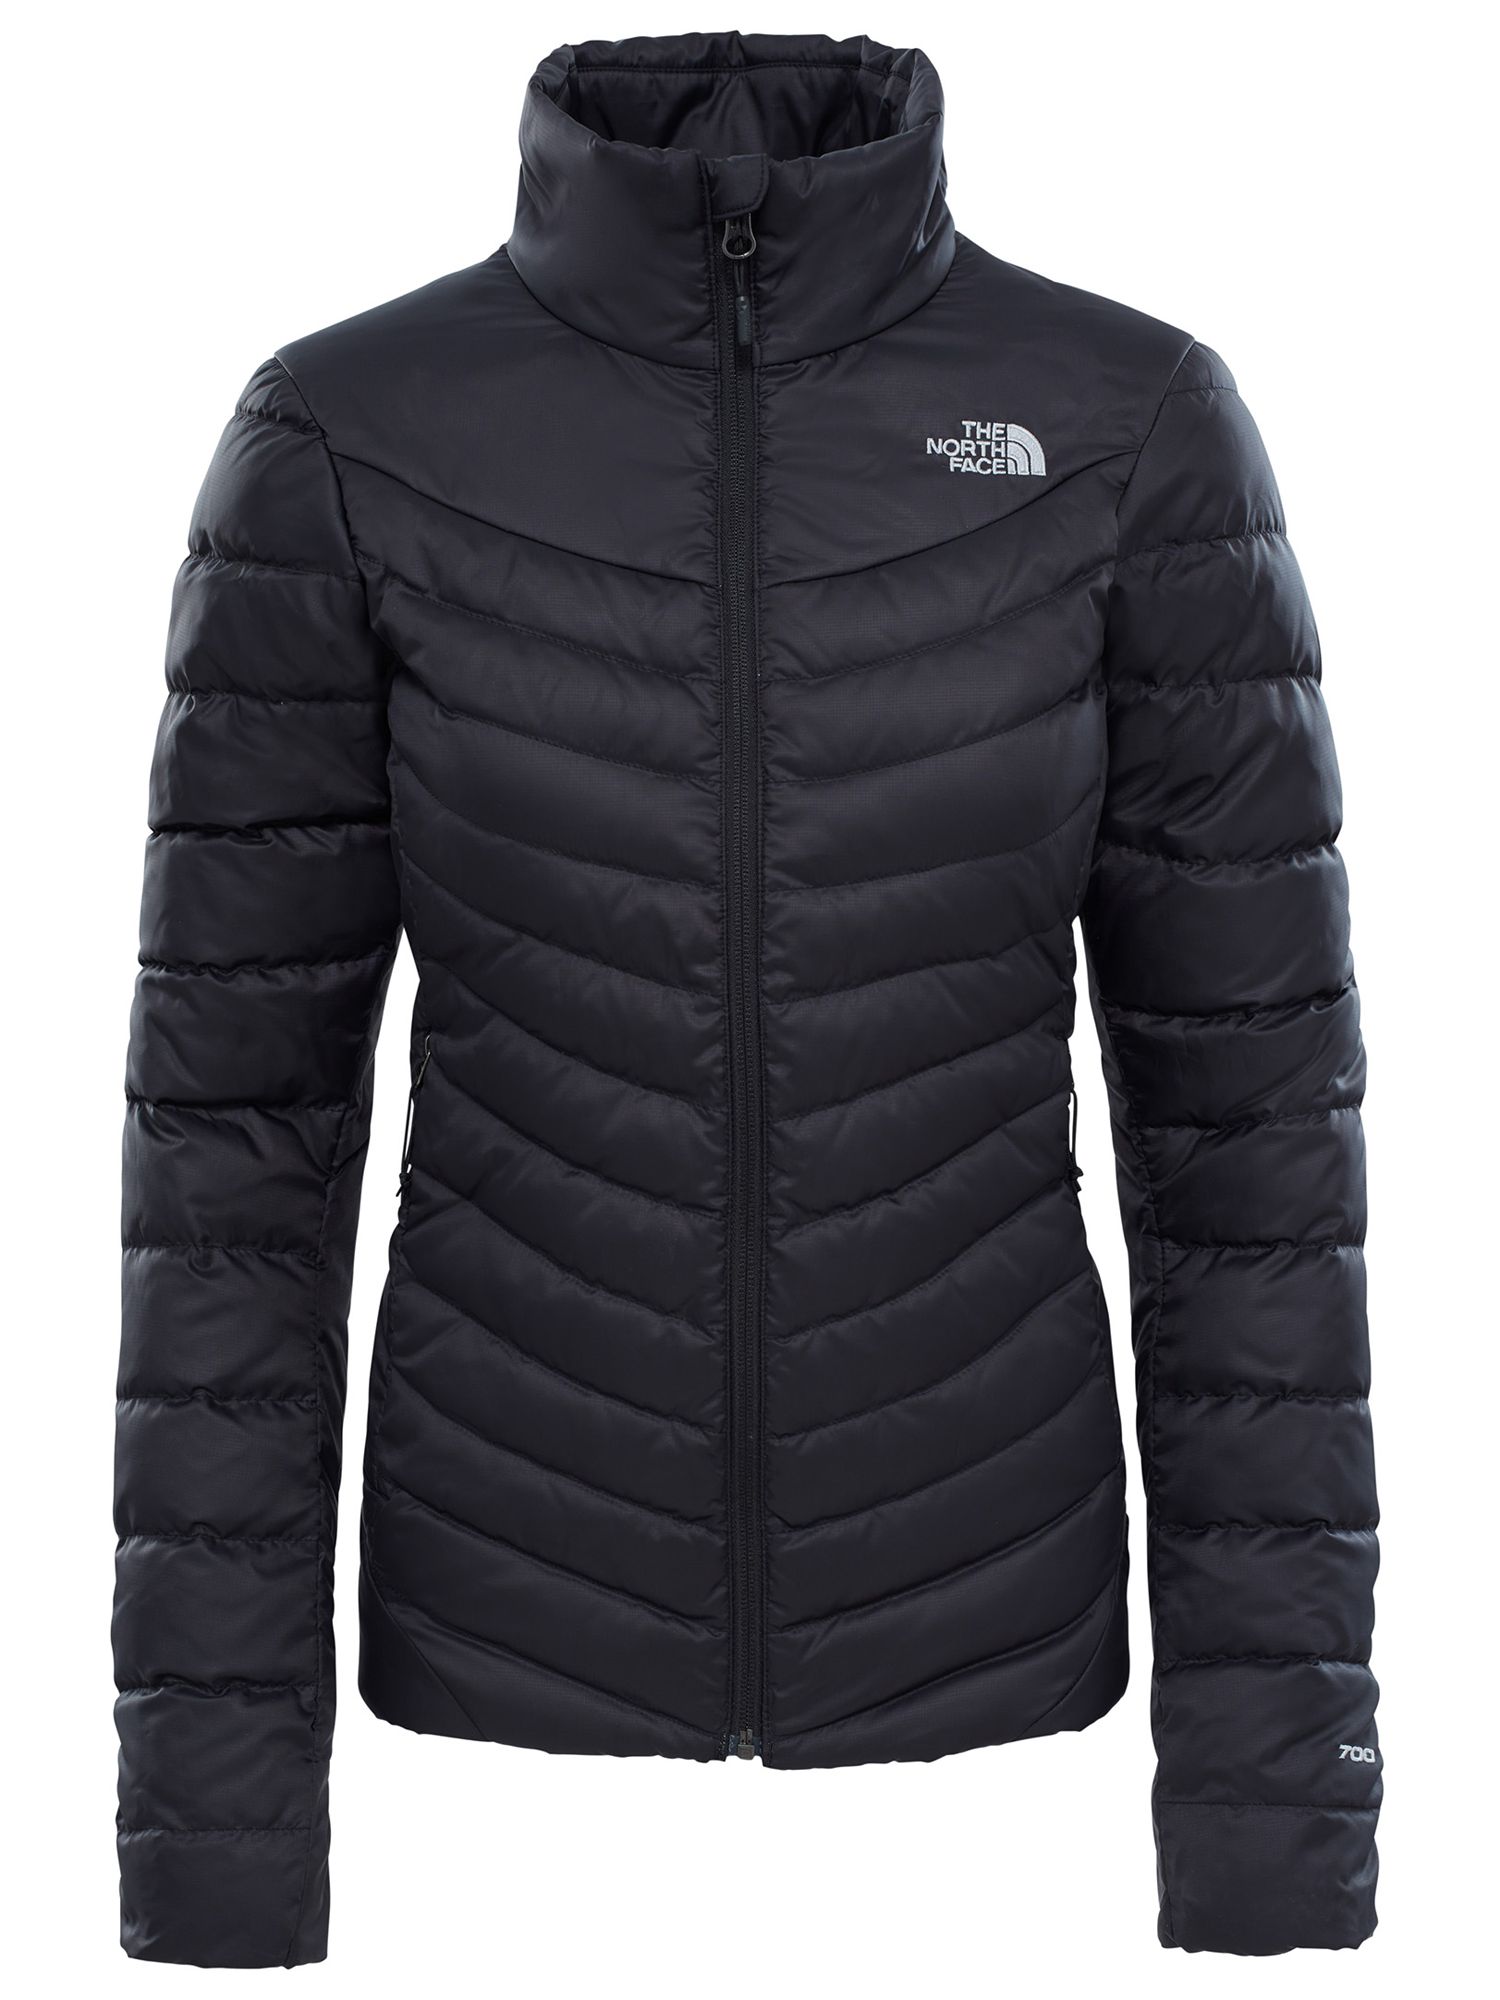 The North Face | John Lewis